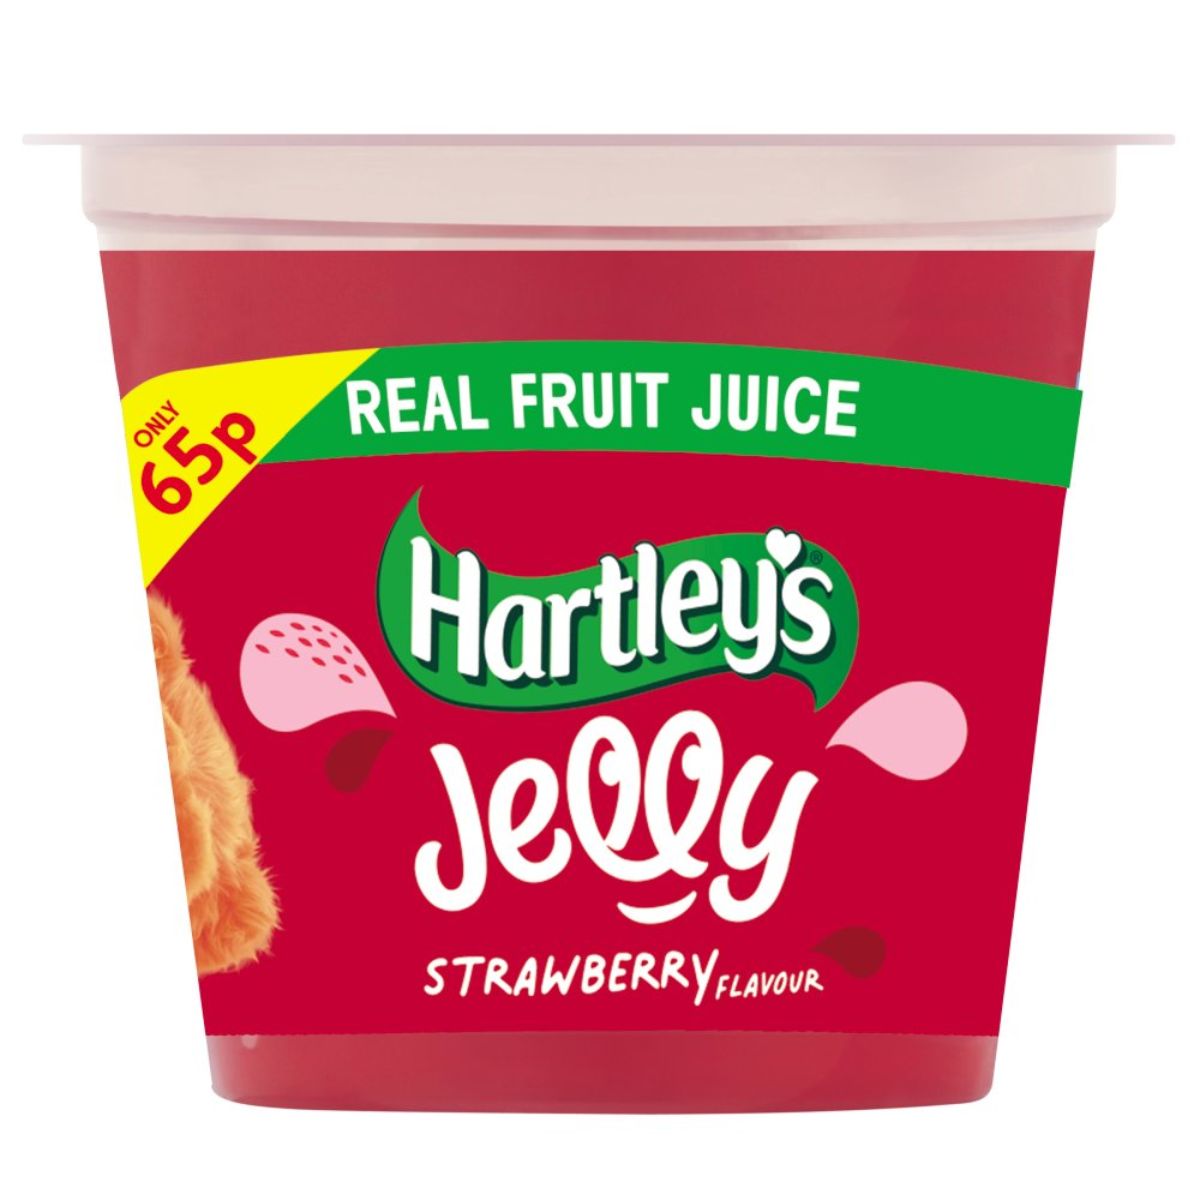 A container of Hartleys - Strawberry Jelly - 125g with a label indicating it contains real fruit juice.